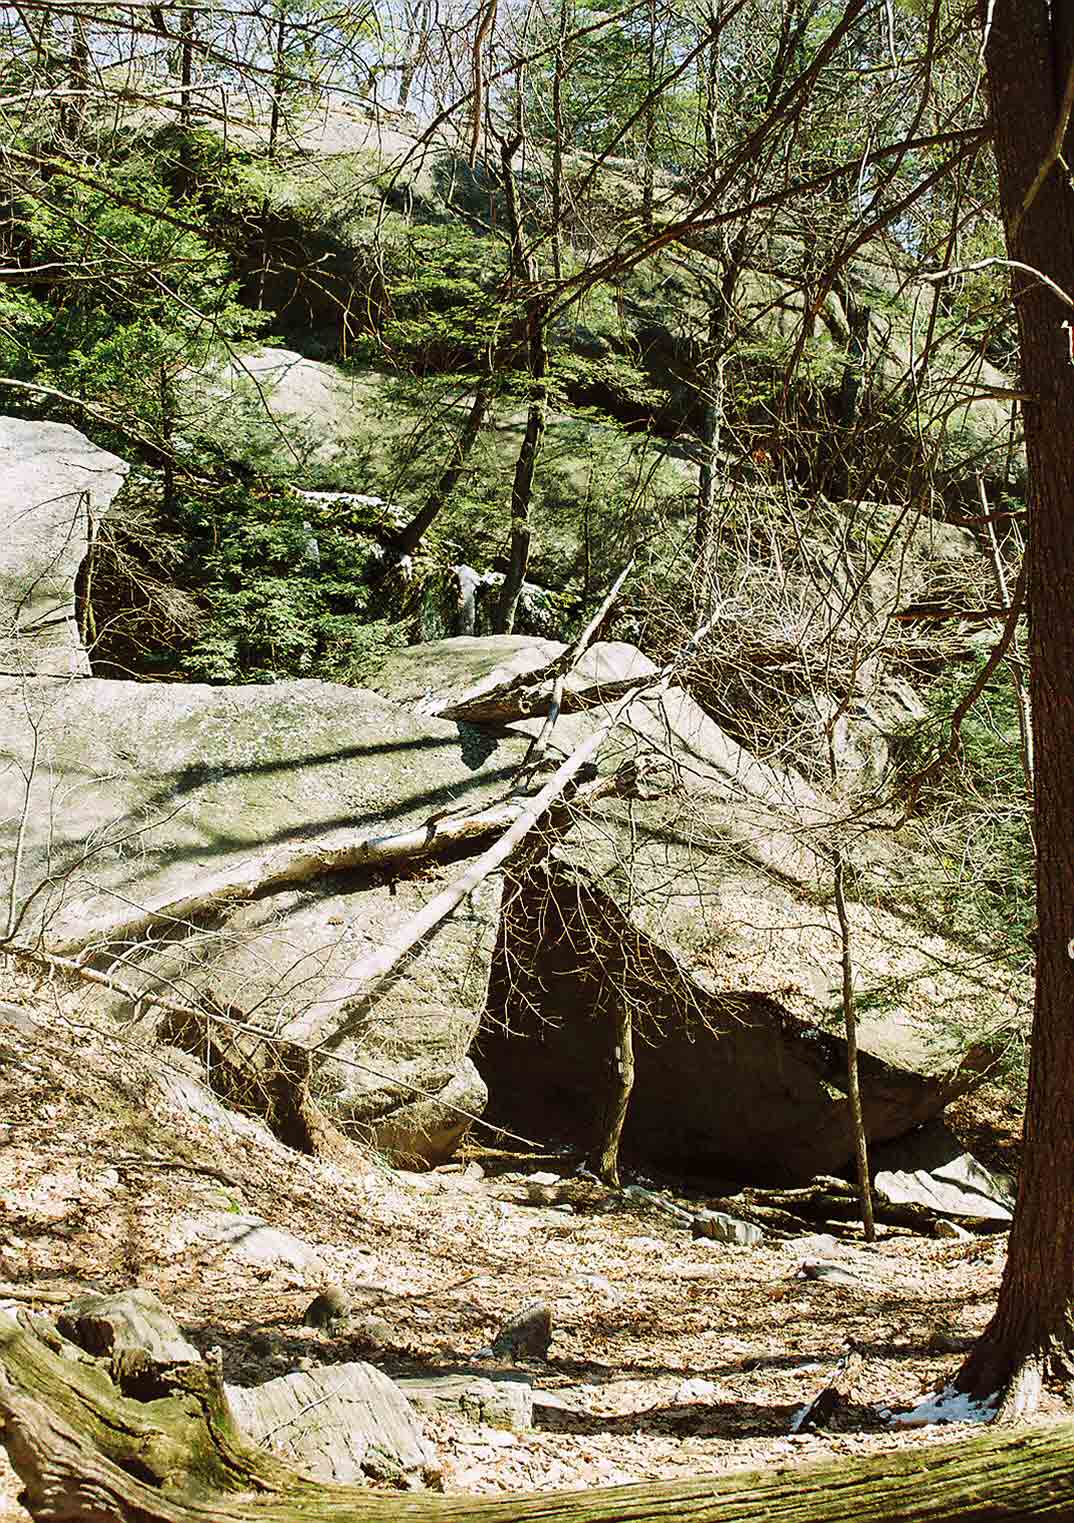 mm 3.2 - The Lemon Squeezer.  The trail passes through a narrow cleft in the rock. Courtesy dlcul@conncoll.edu